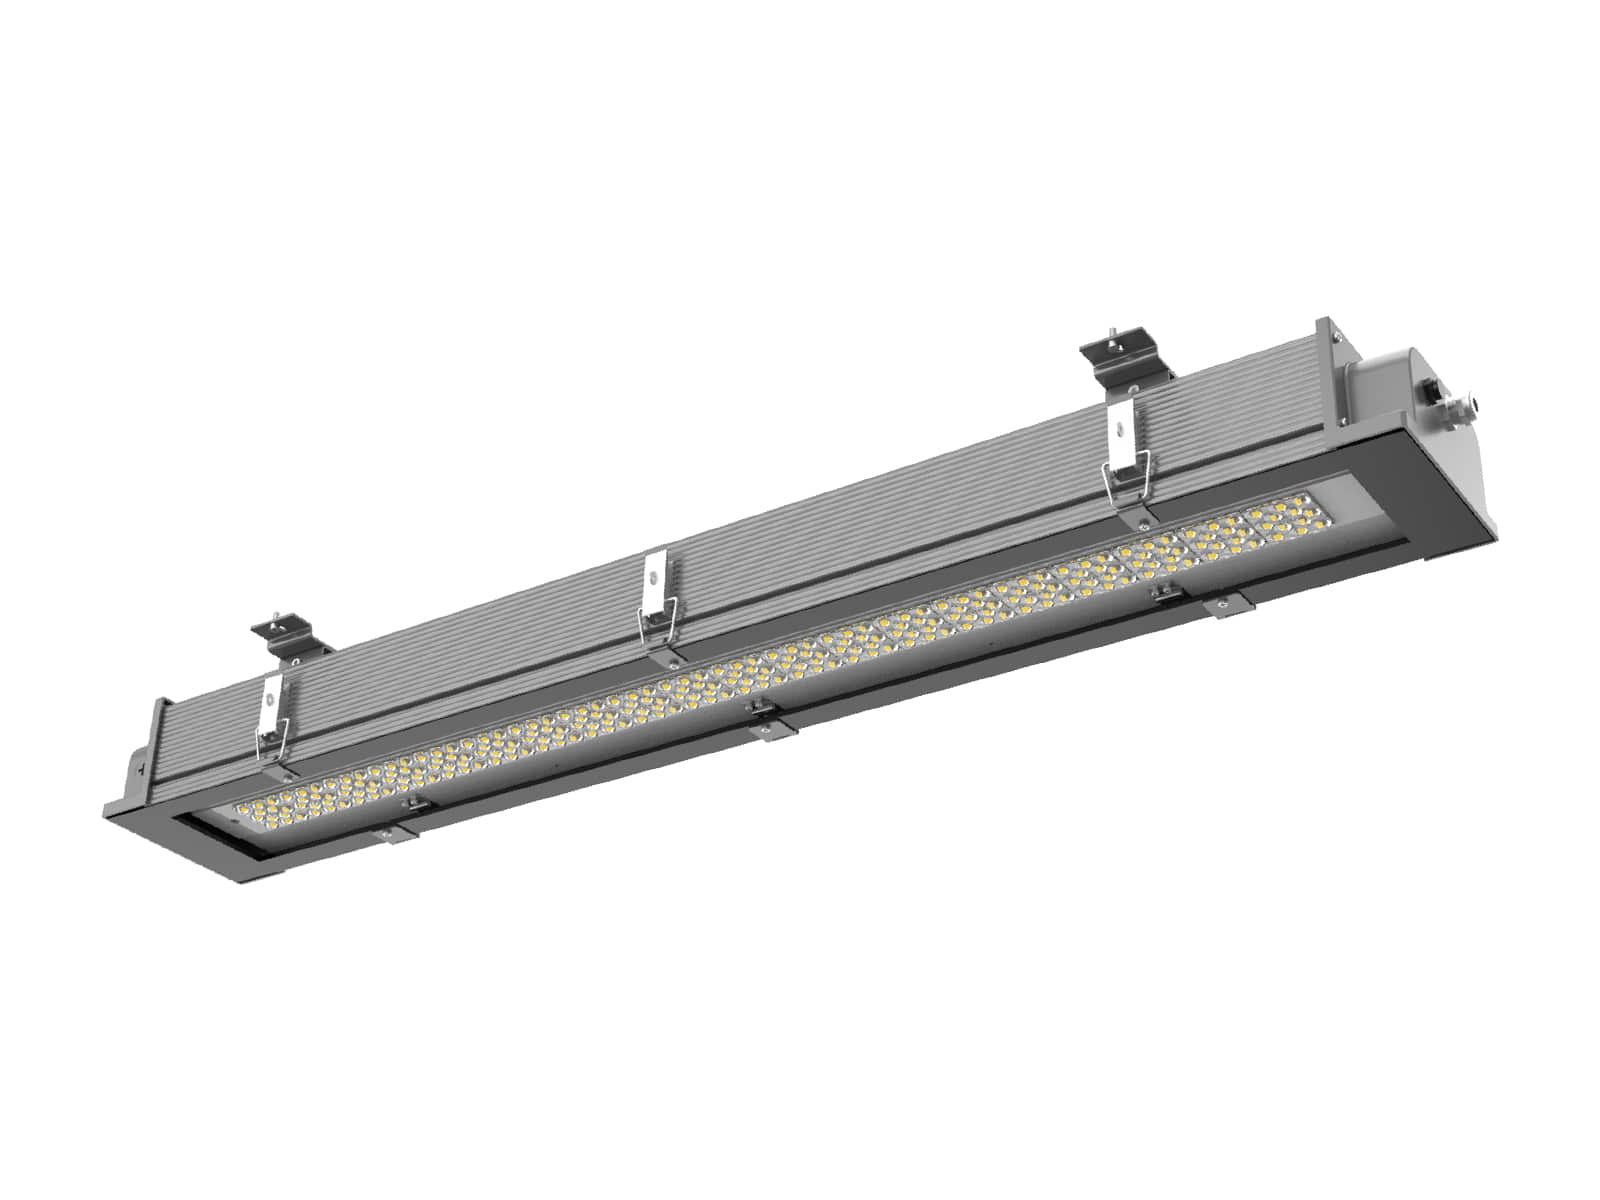 TN07 Corrosion-Resistant Professional Tunnel Lighting Solution